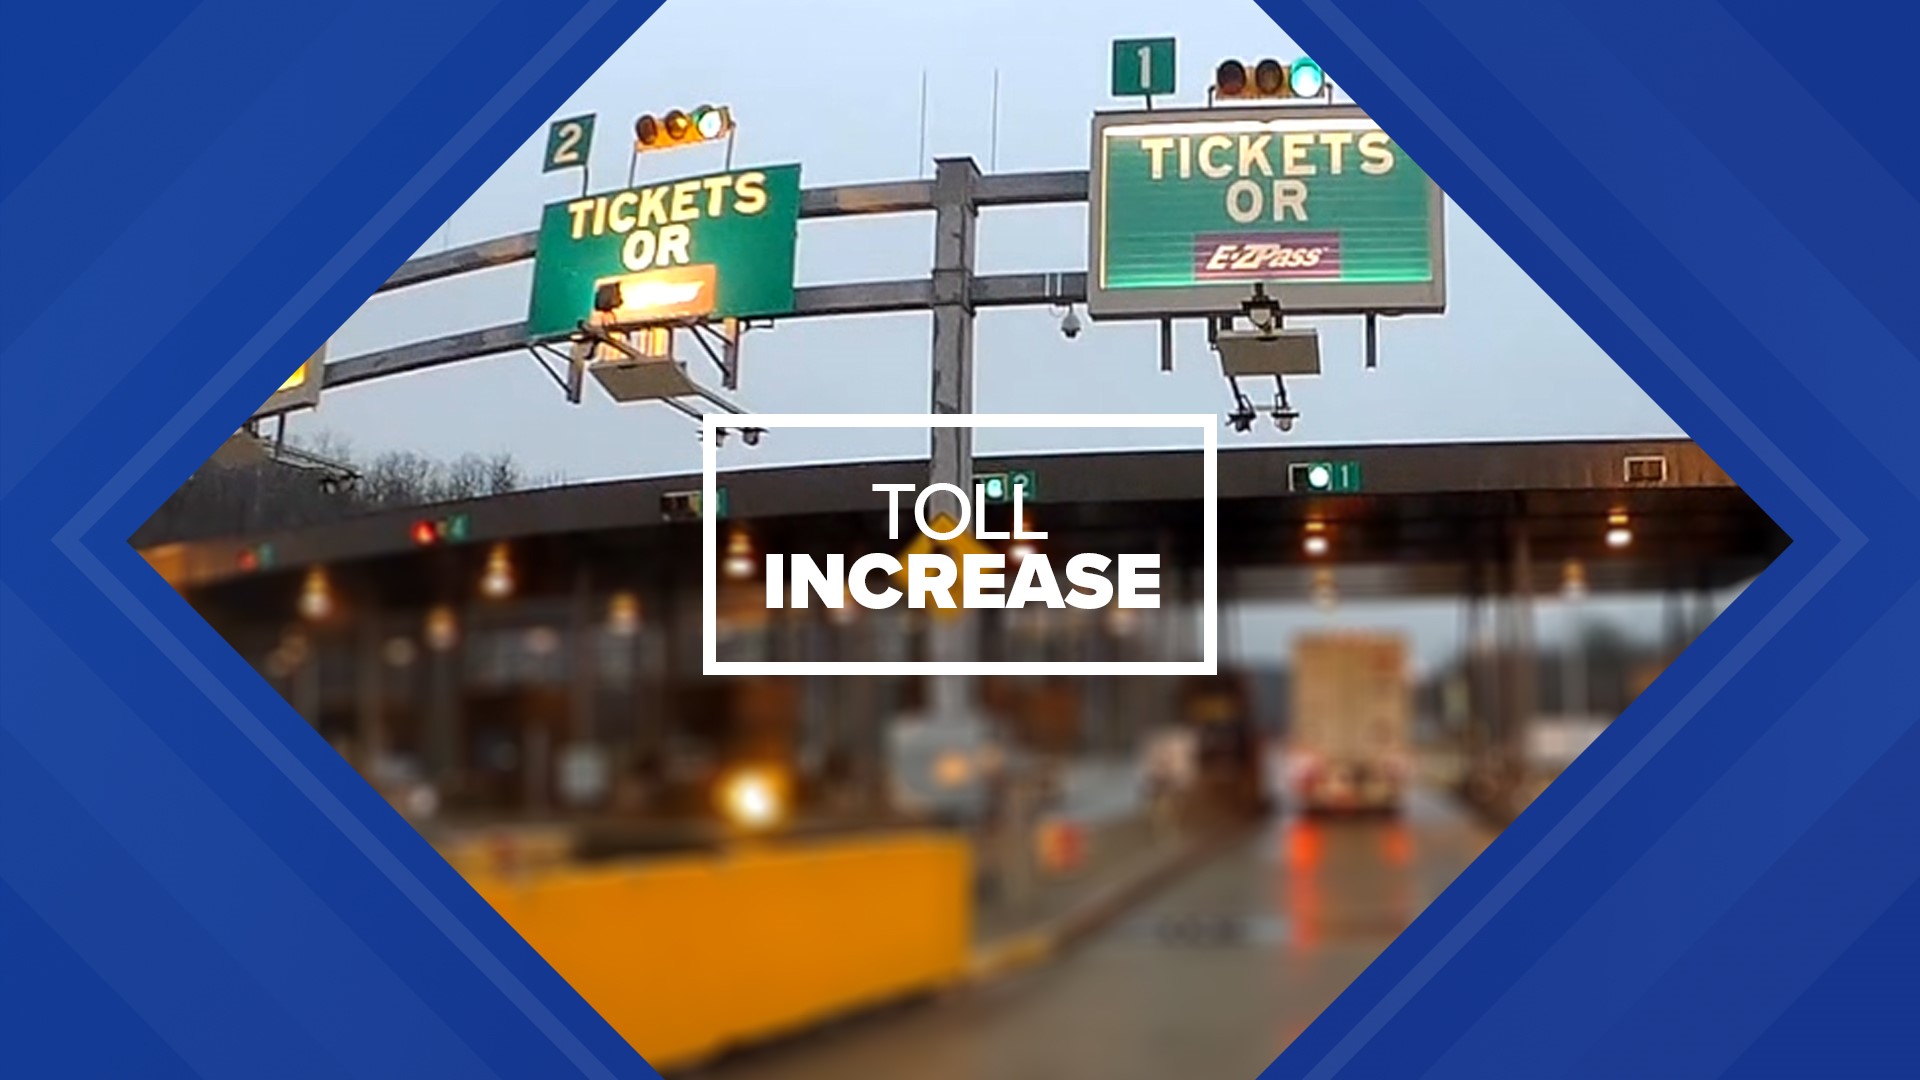 The Pennsylvania Turnpike Commission is raising its rates by 5 percent in January.